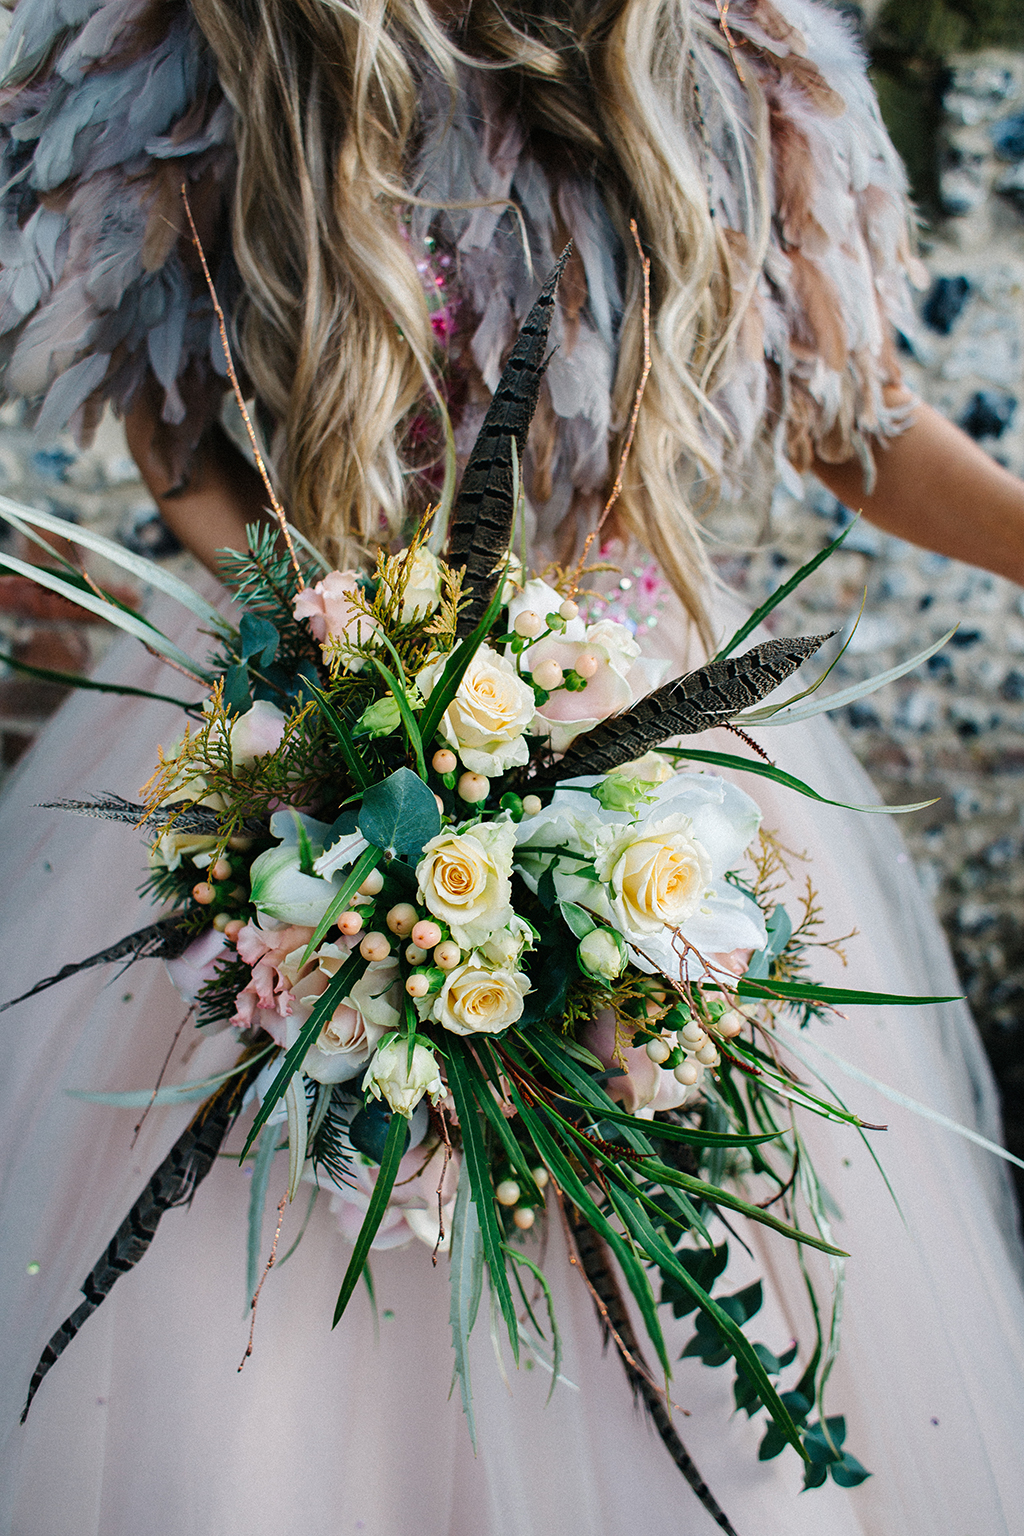 The bouquet was a creative and textural piece with much foliage and feathers